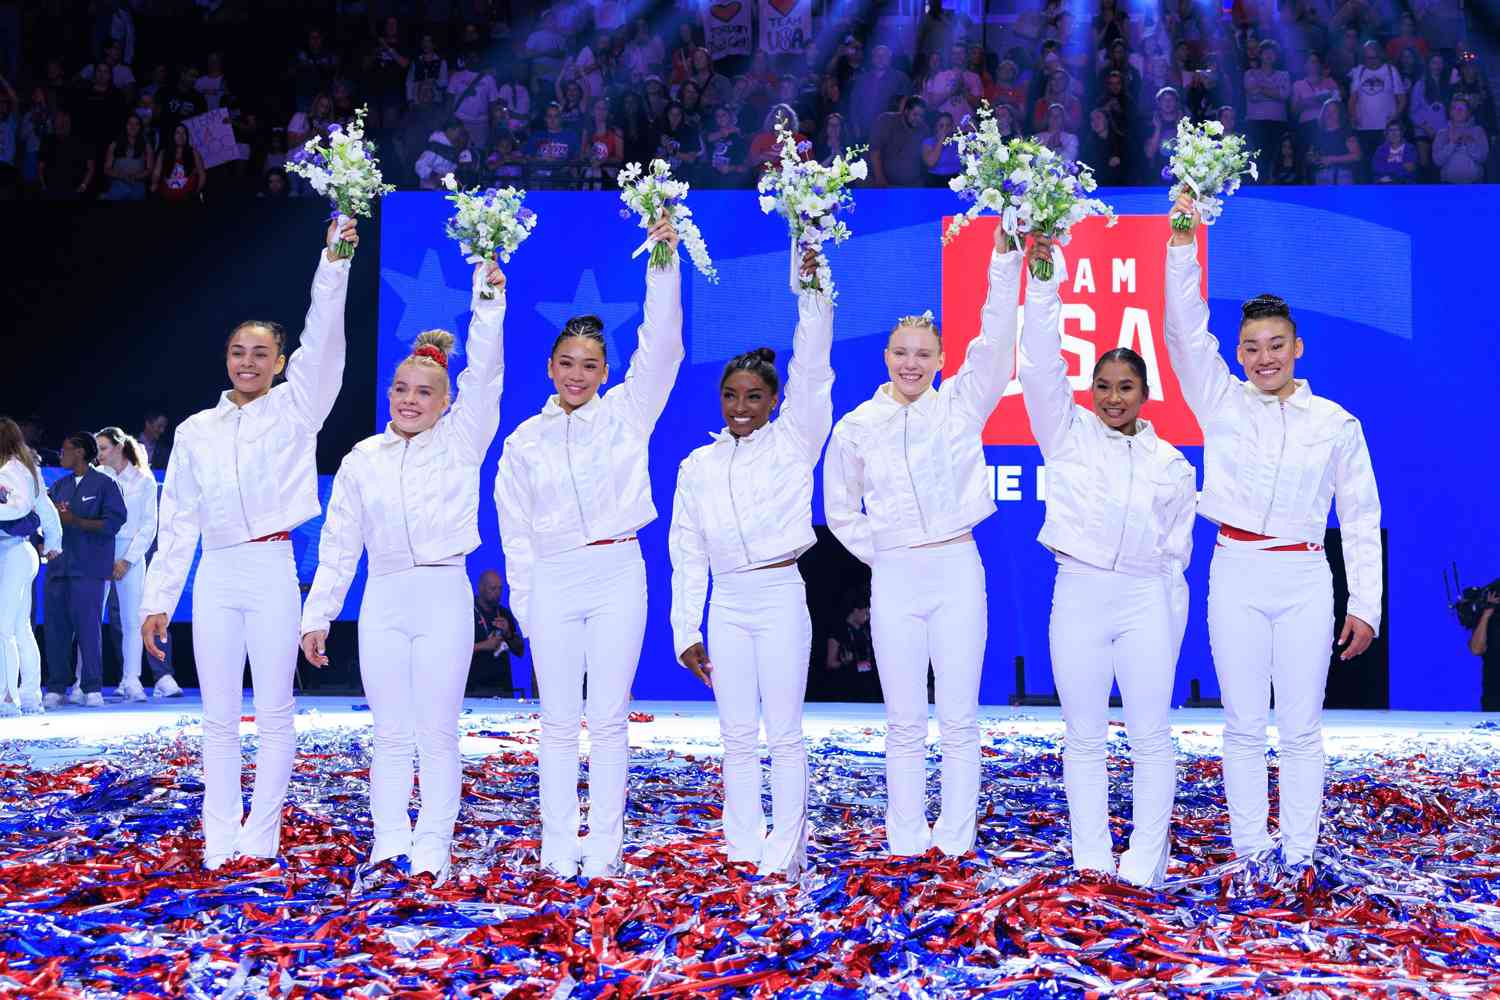 Hezly Rivera, Joscelyn Roberson (alternate), Suni Lee, Simone Biles, Jade Carey, Jordan Chiles, and Leanne Wong (alternate) celebrate after being named at the U.S. Olympic Team for women's gymnastics at Target Center in Minneapolis, United States on June 30, 2024